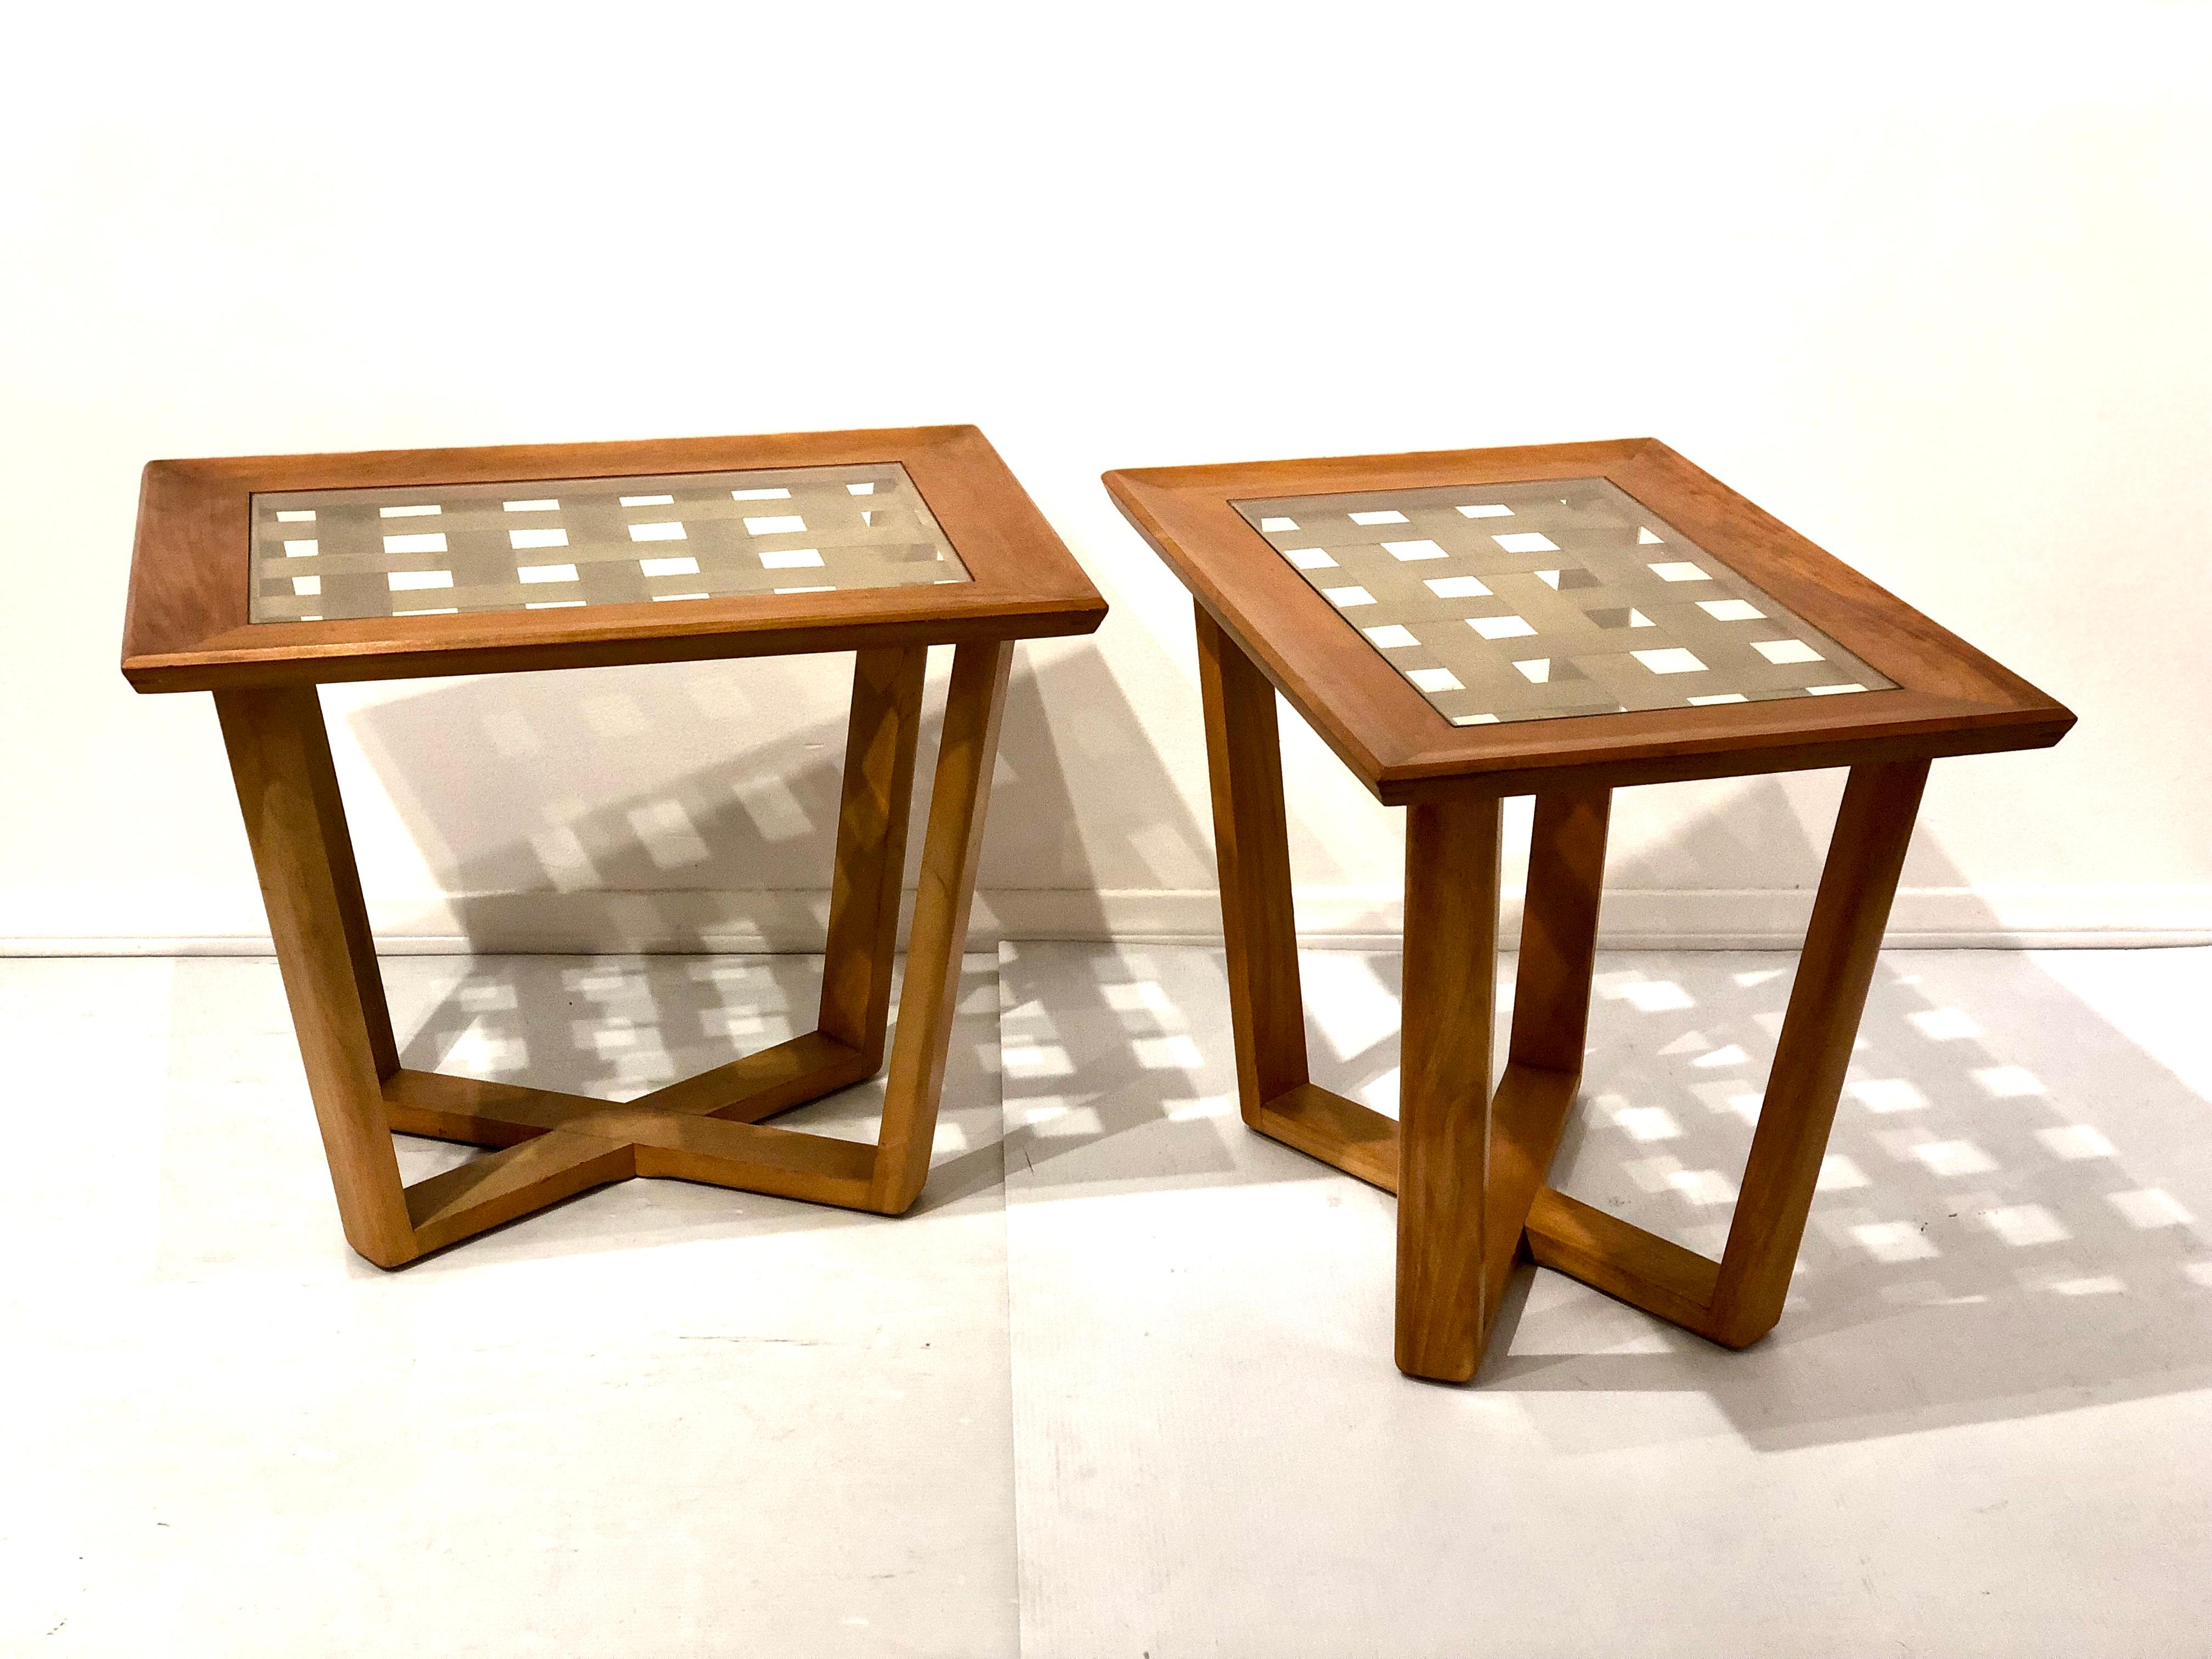 Rare pair of end tables in blonde wood with brass grill centre and glass tops, circa 1950s excellent construction X base solid and sturdy in its original finish, very clean we have clean each table and oil it.